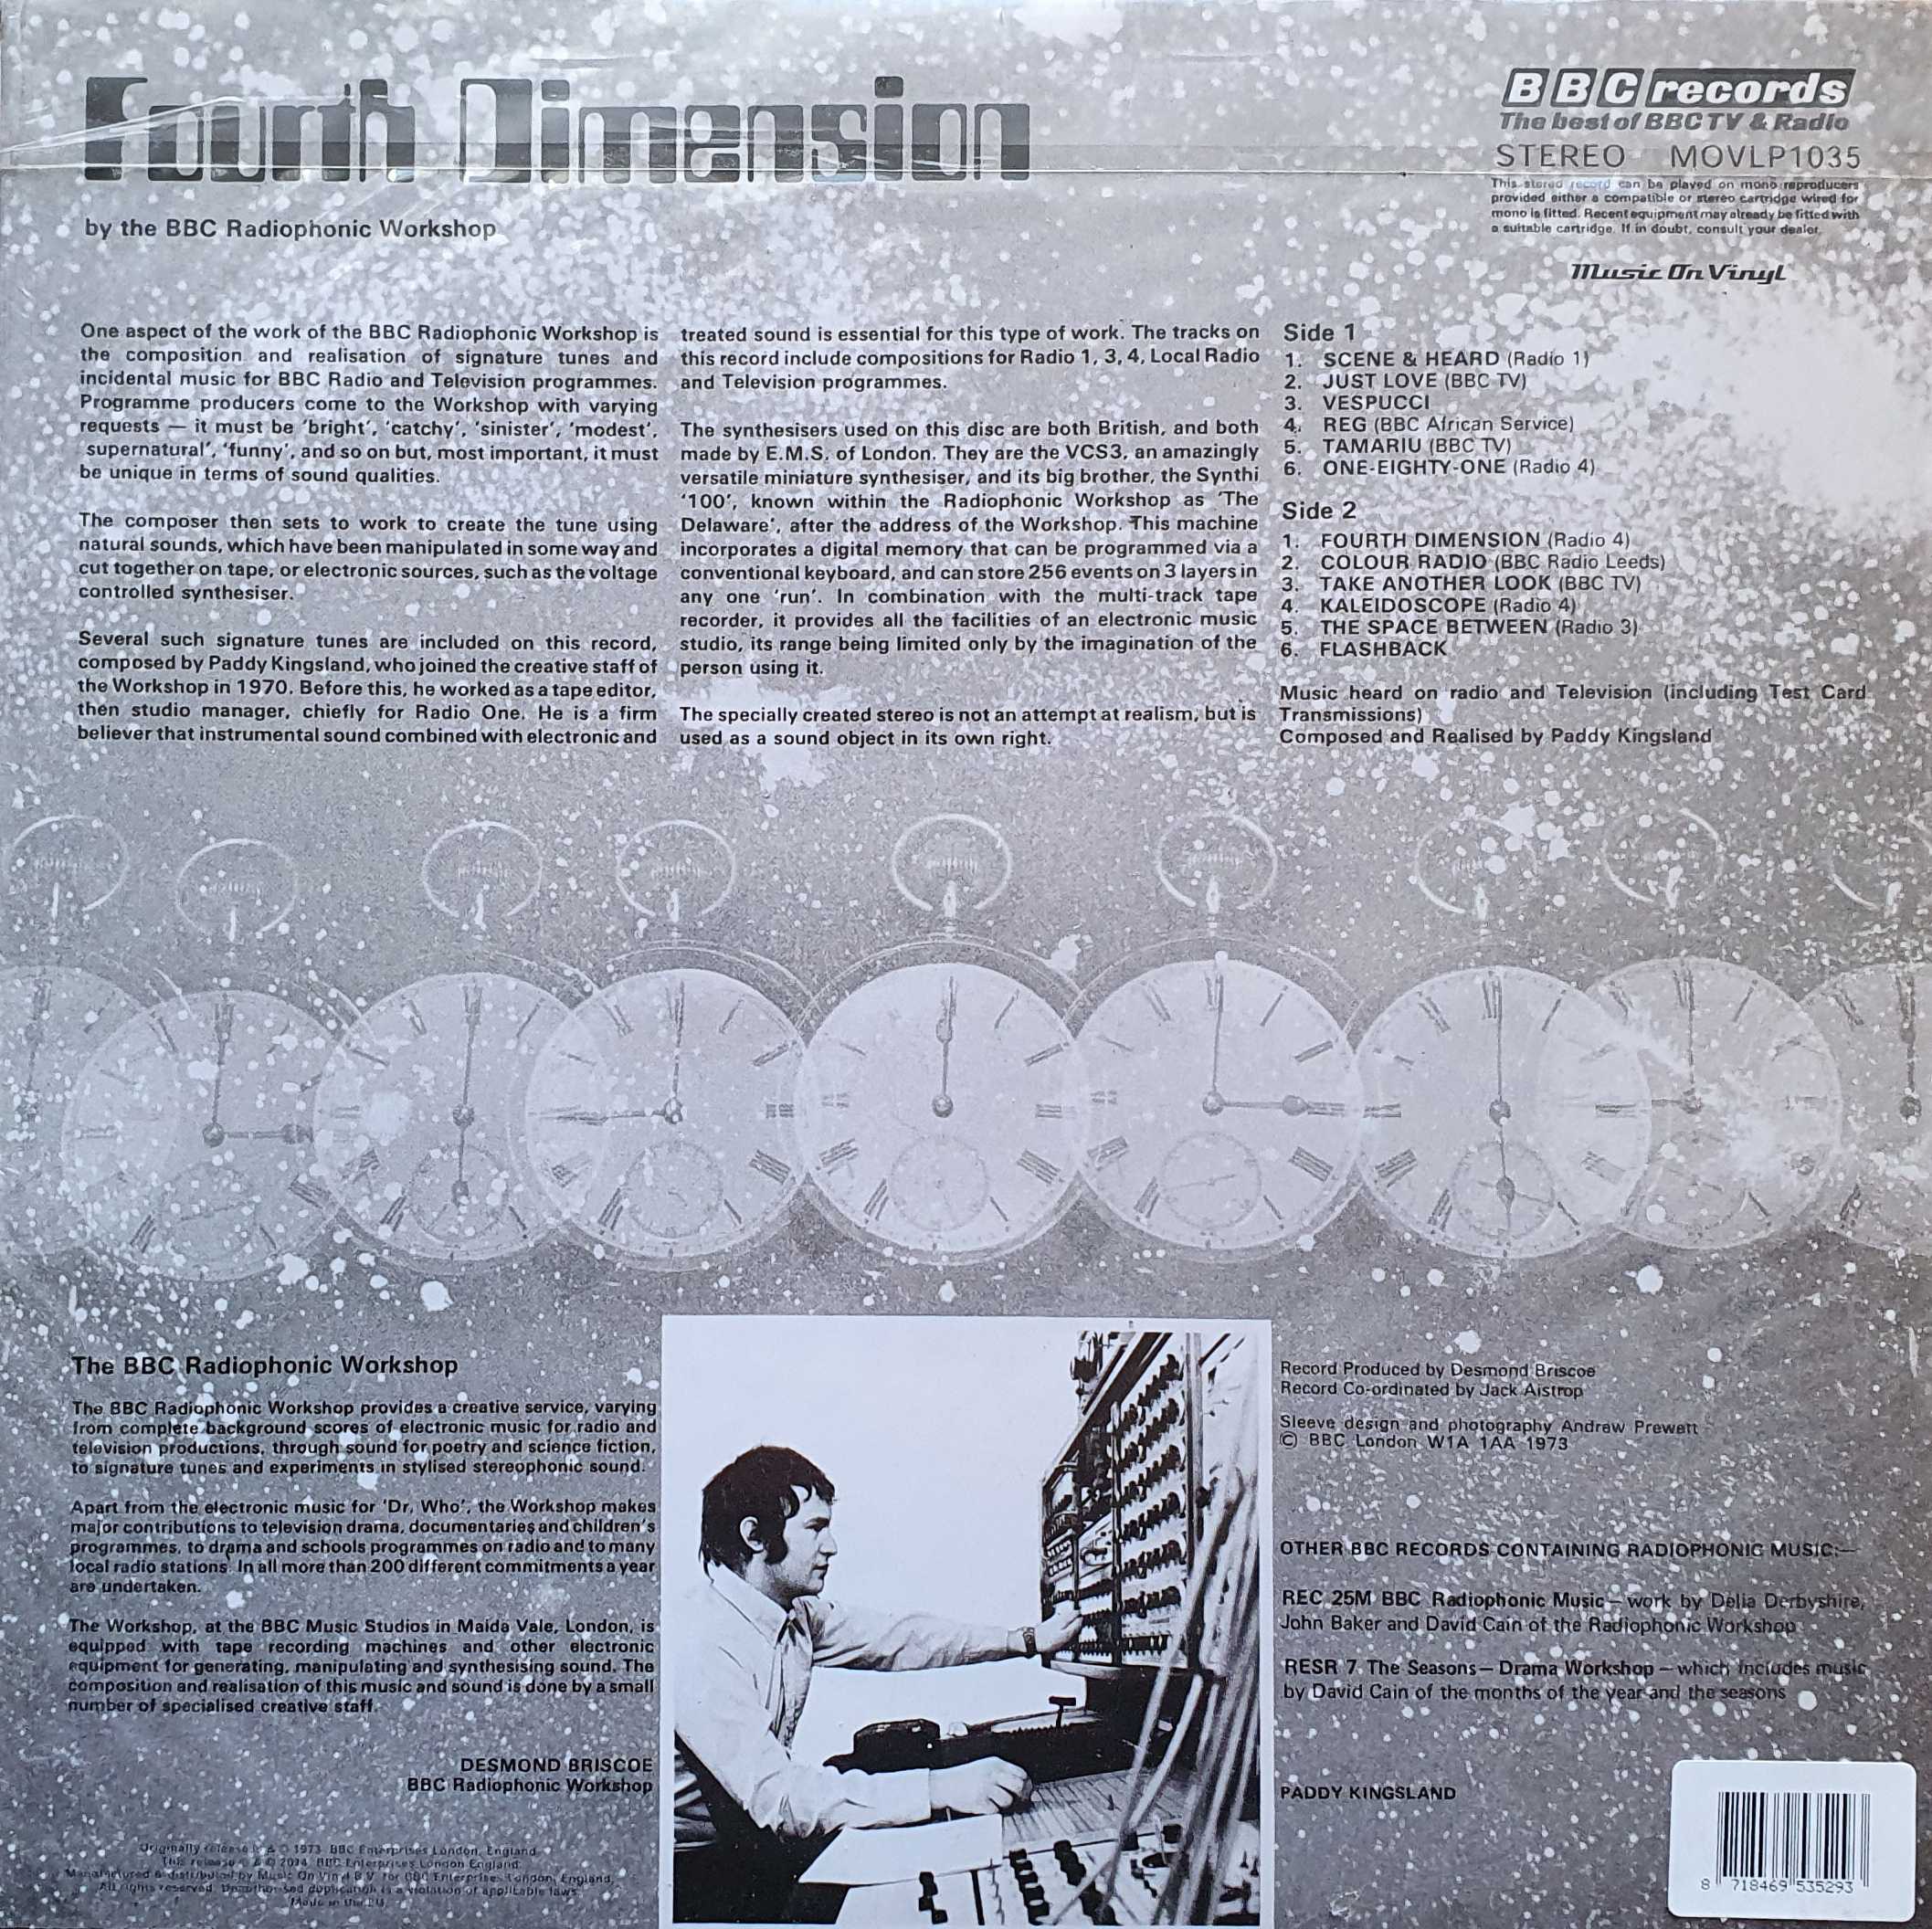 Picture of MOVLP 1035 The fourth dimension by artist Paddy Kingsland / BBC Radiophonic Workshop from the BBC records and Tapes library